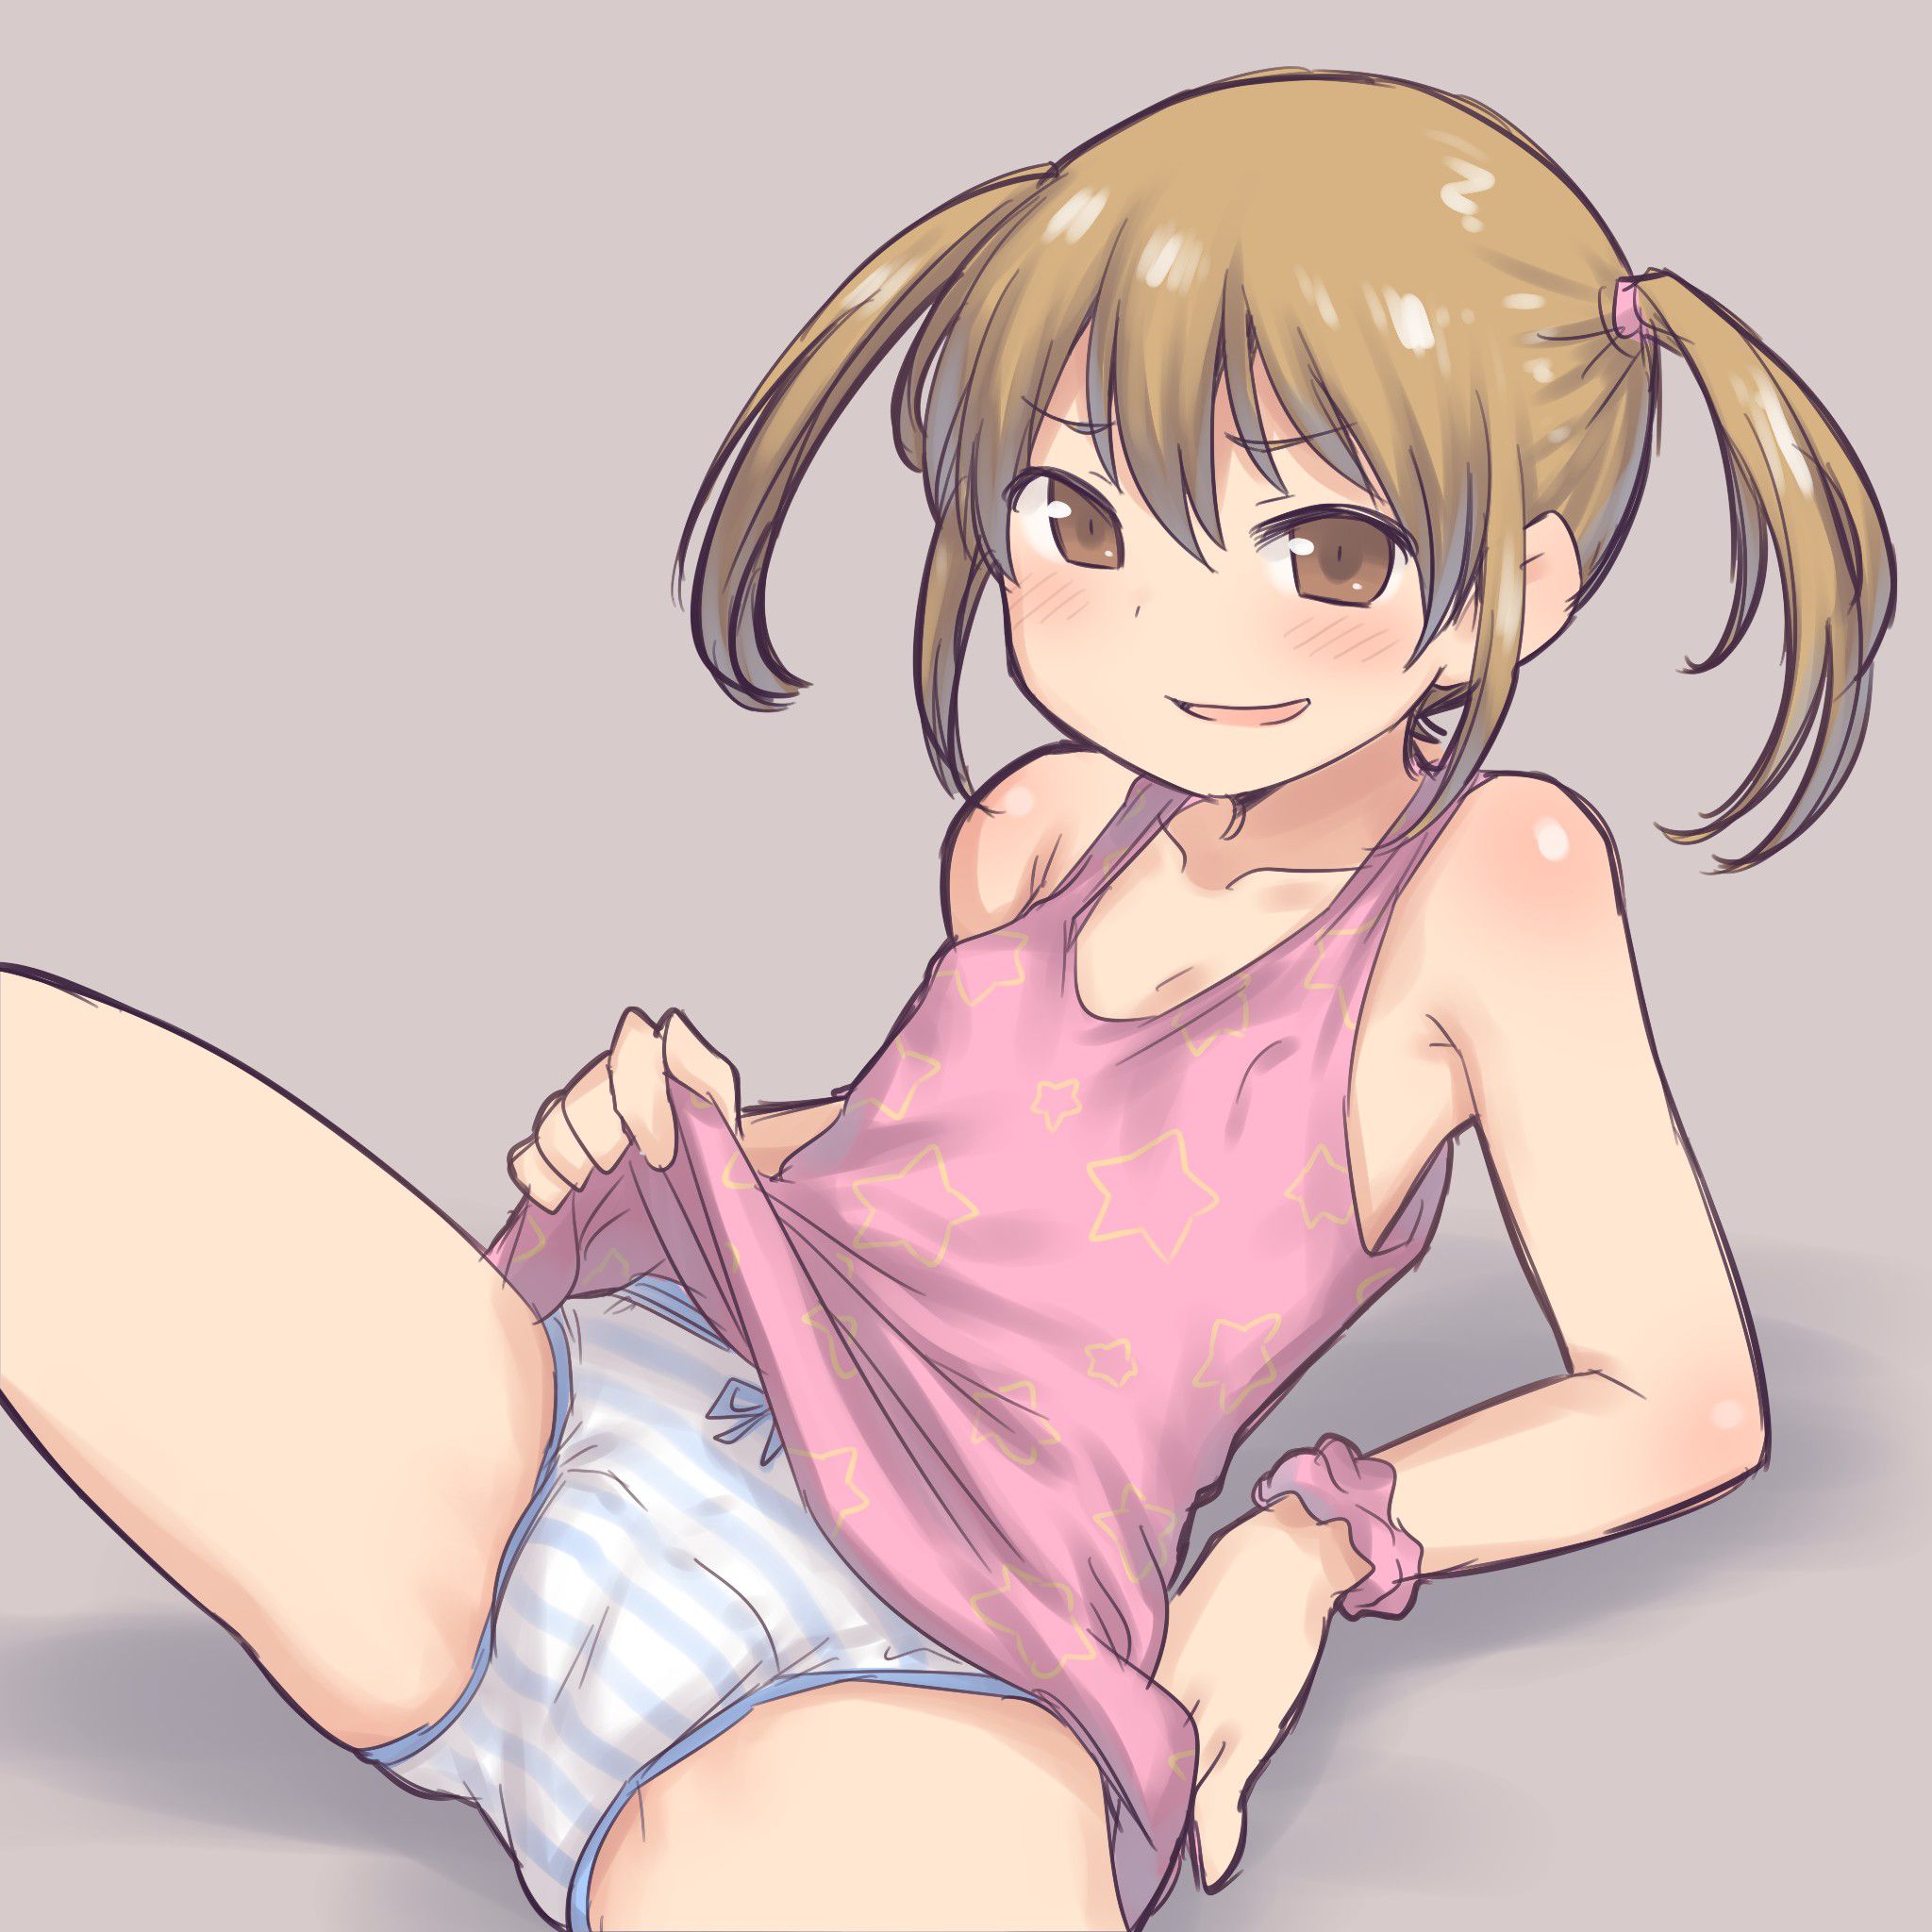 【2nd】Erotic image of a girl who is ready to open both legs and accept it Part 35 15